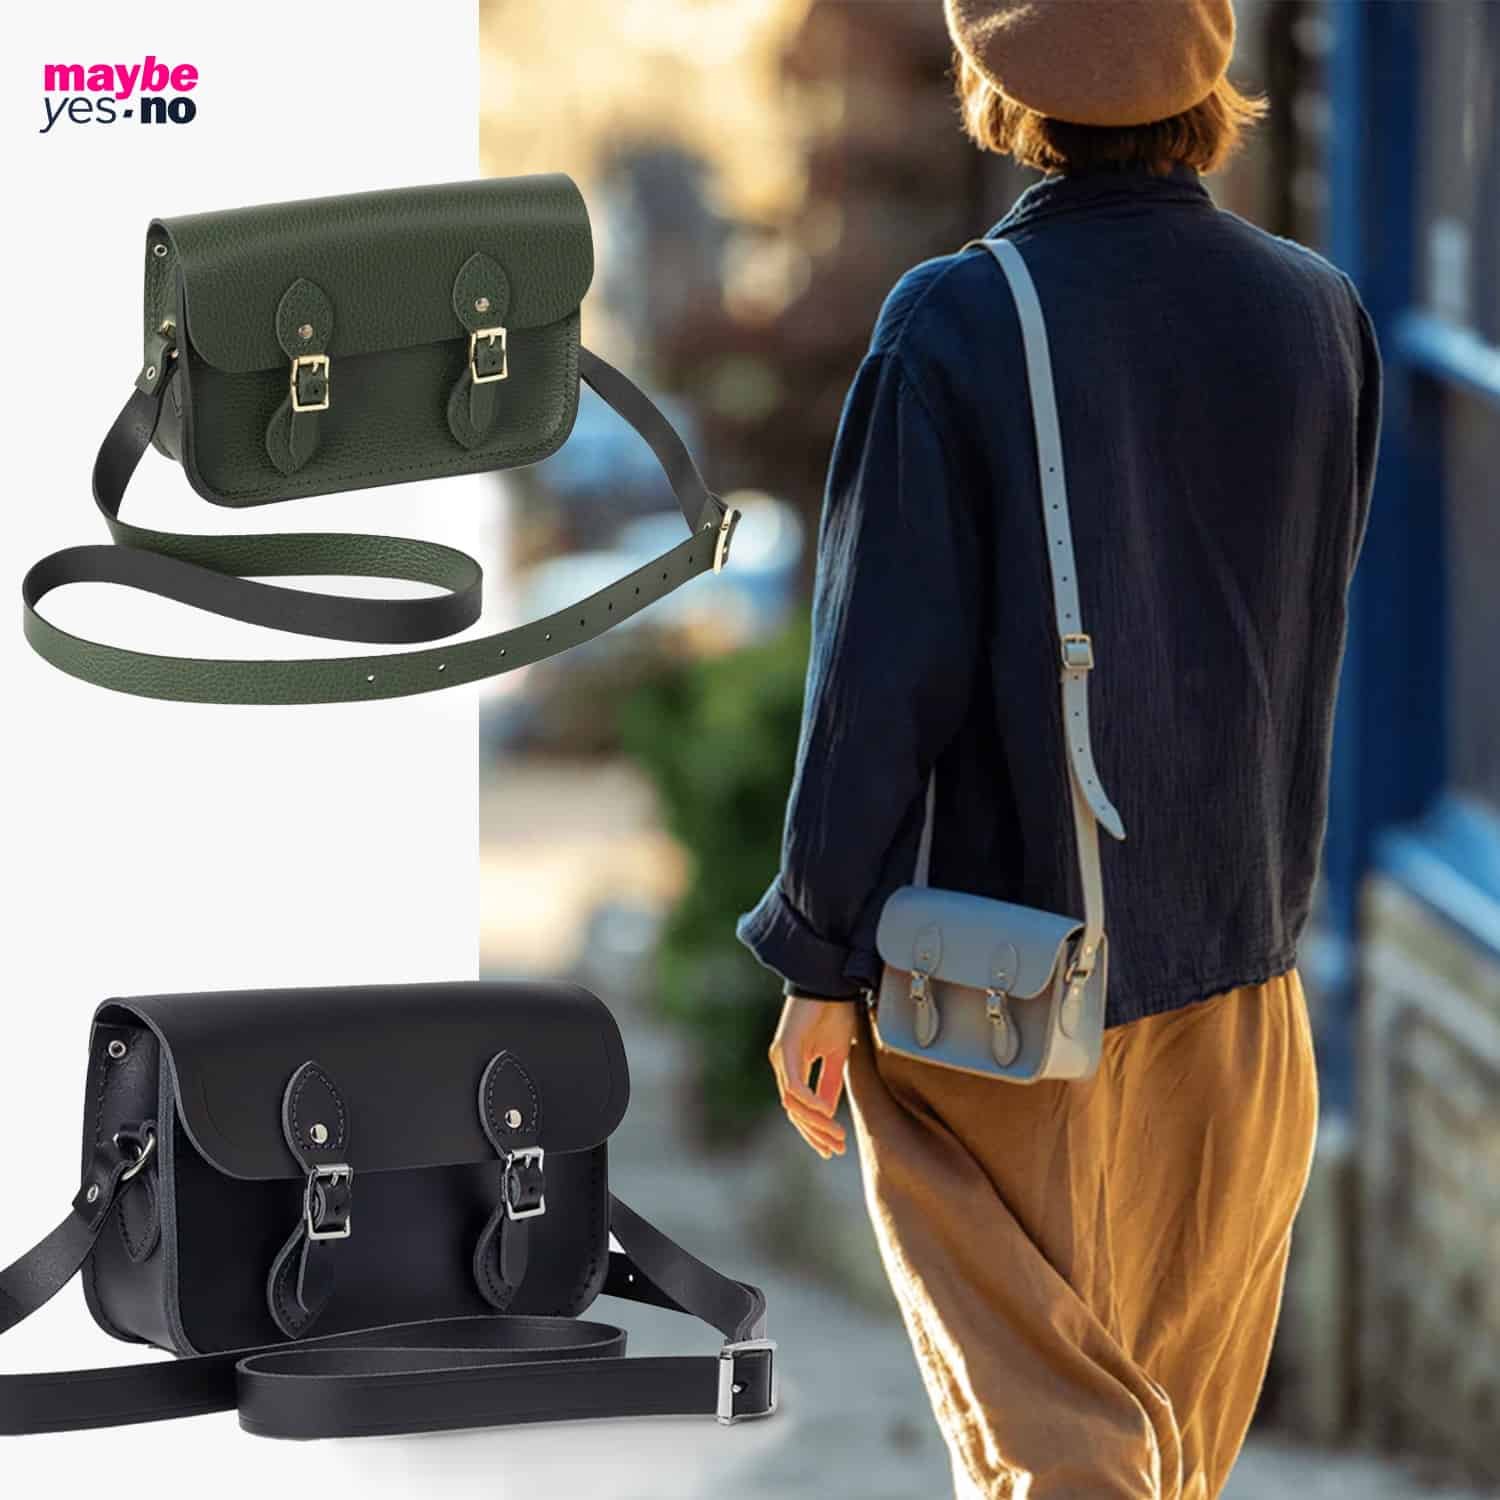 Cambridge Satchel - up to 30% off selected bags